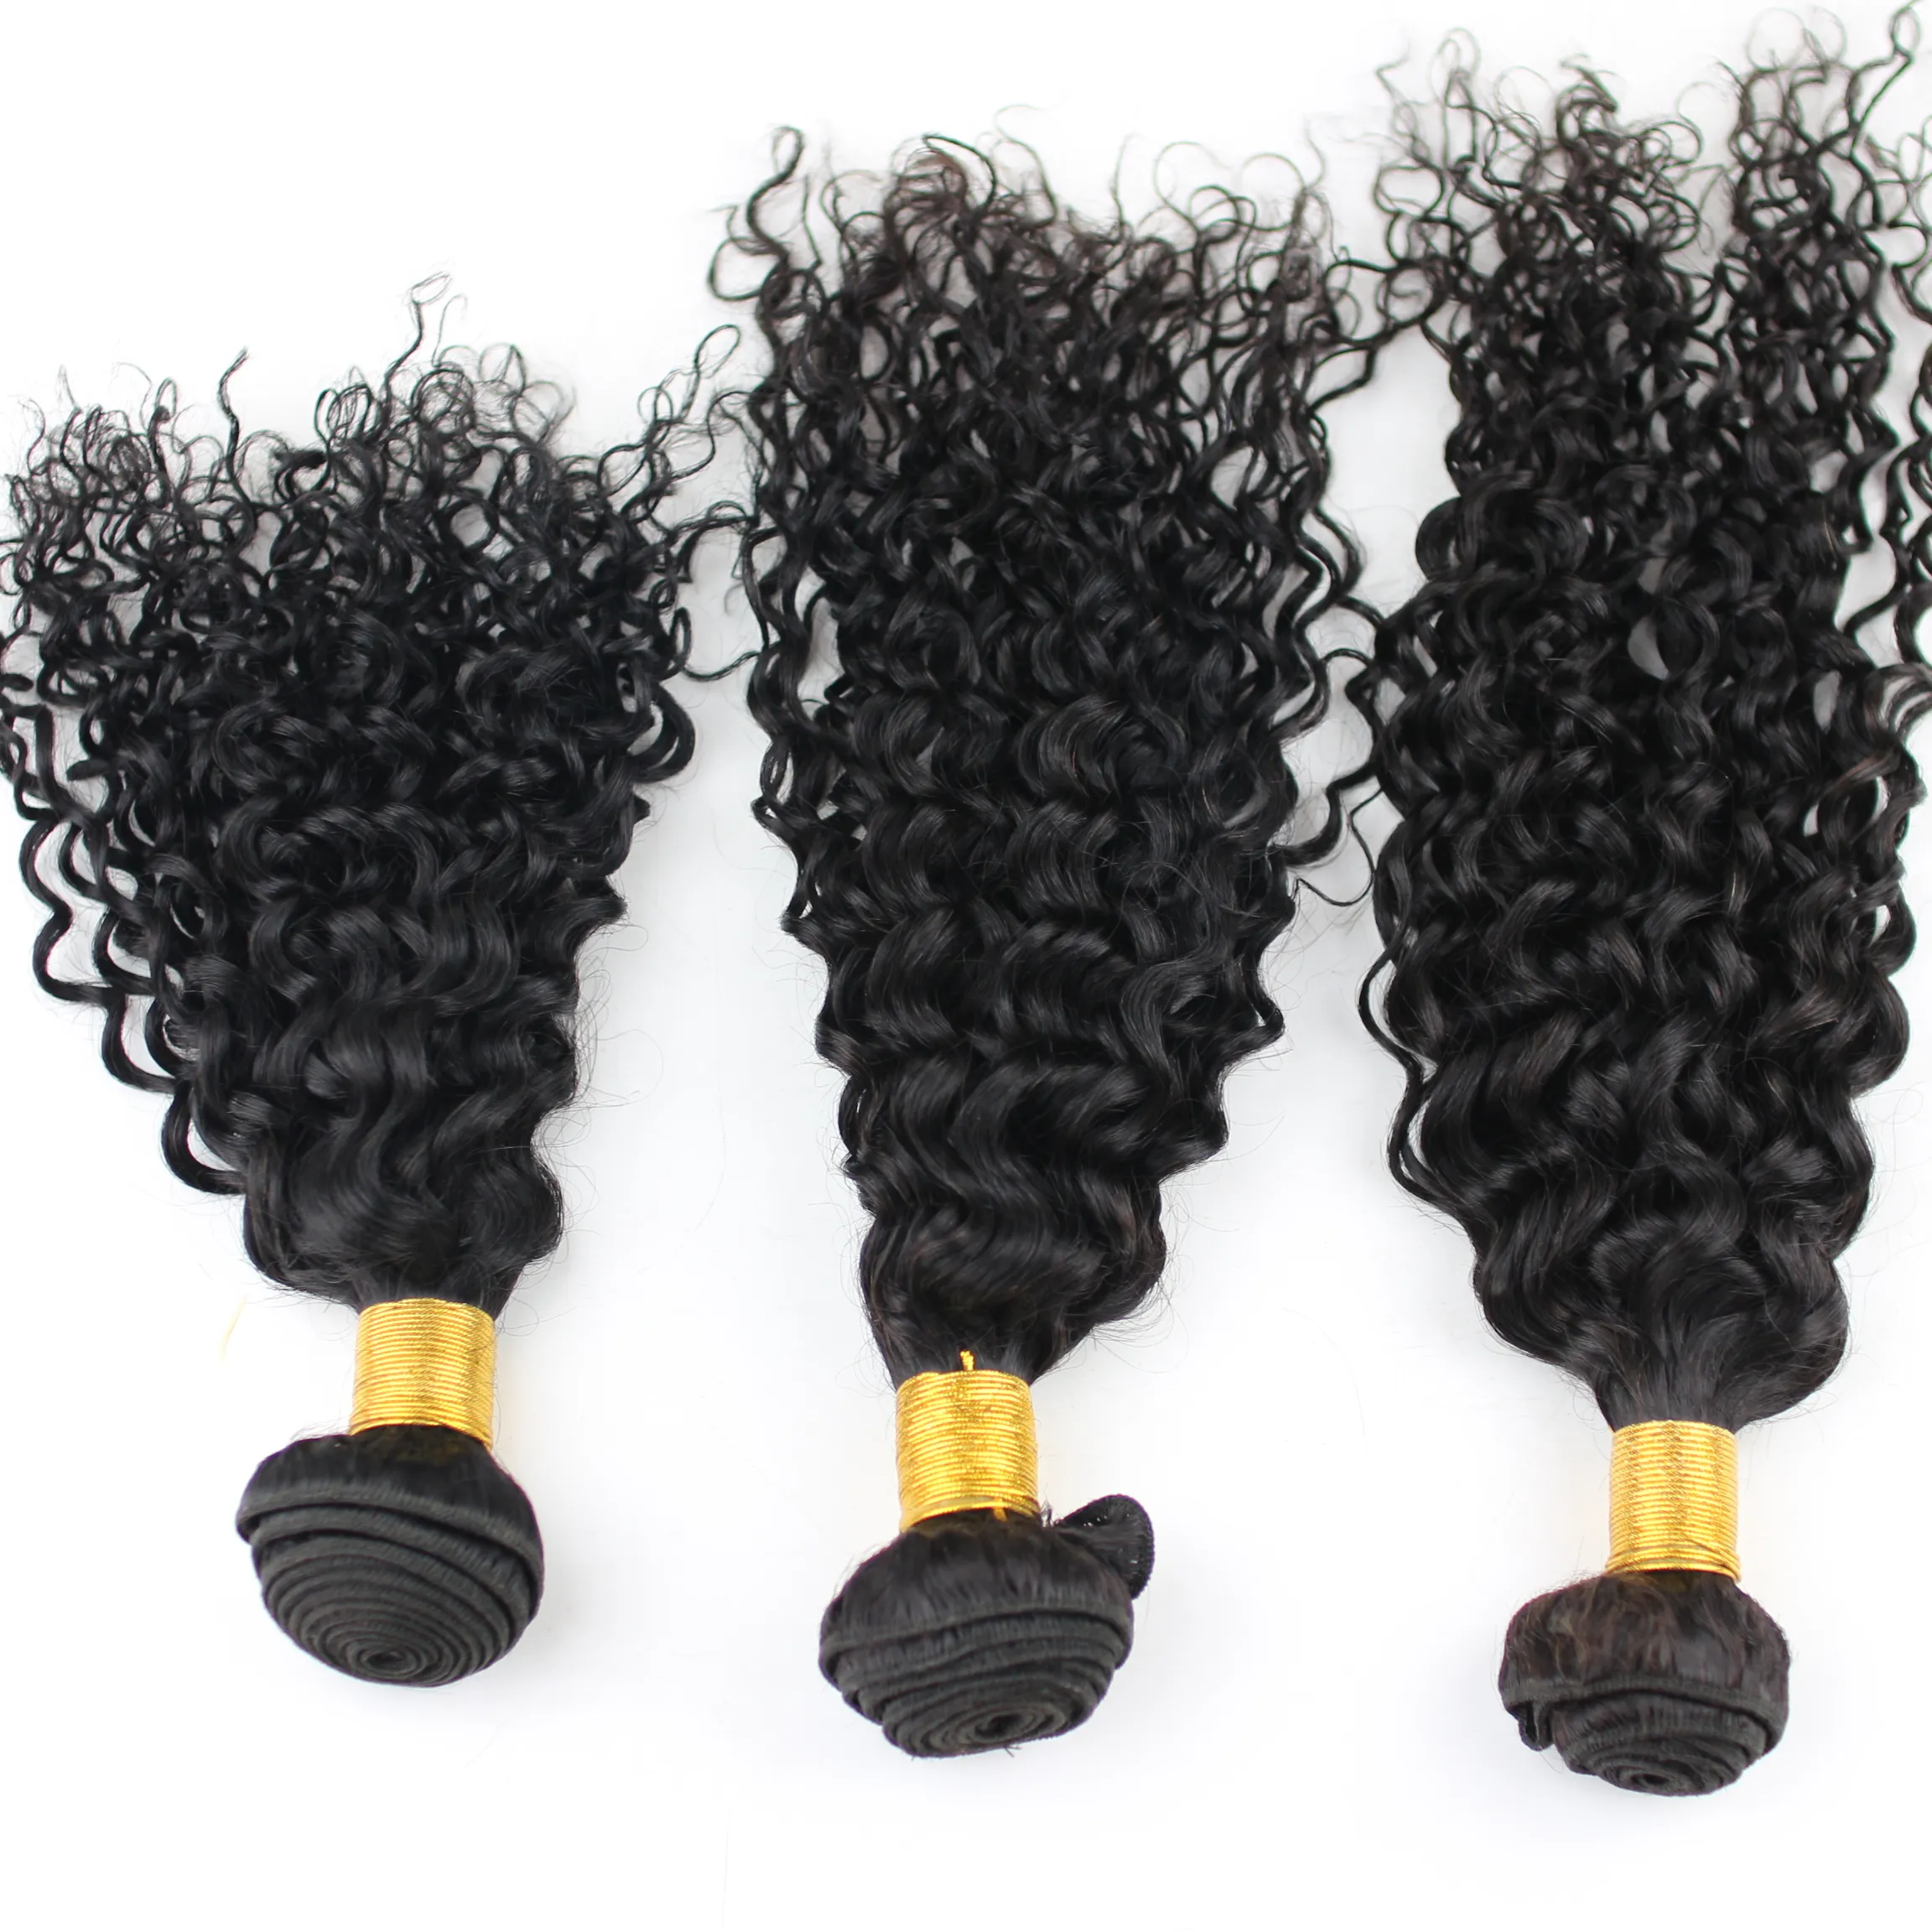 Arrival Cheap Natural Color 100 Virgin Crochet Braids With Human Malaysian Faux Locs Curly Bulky Hair